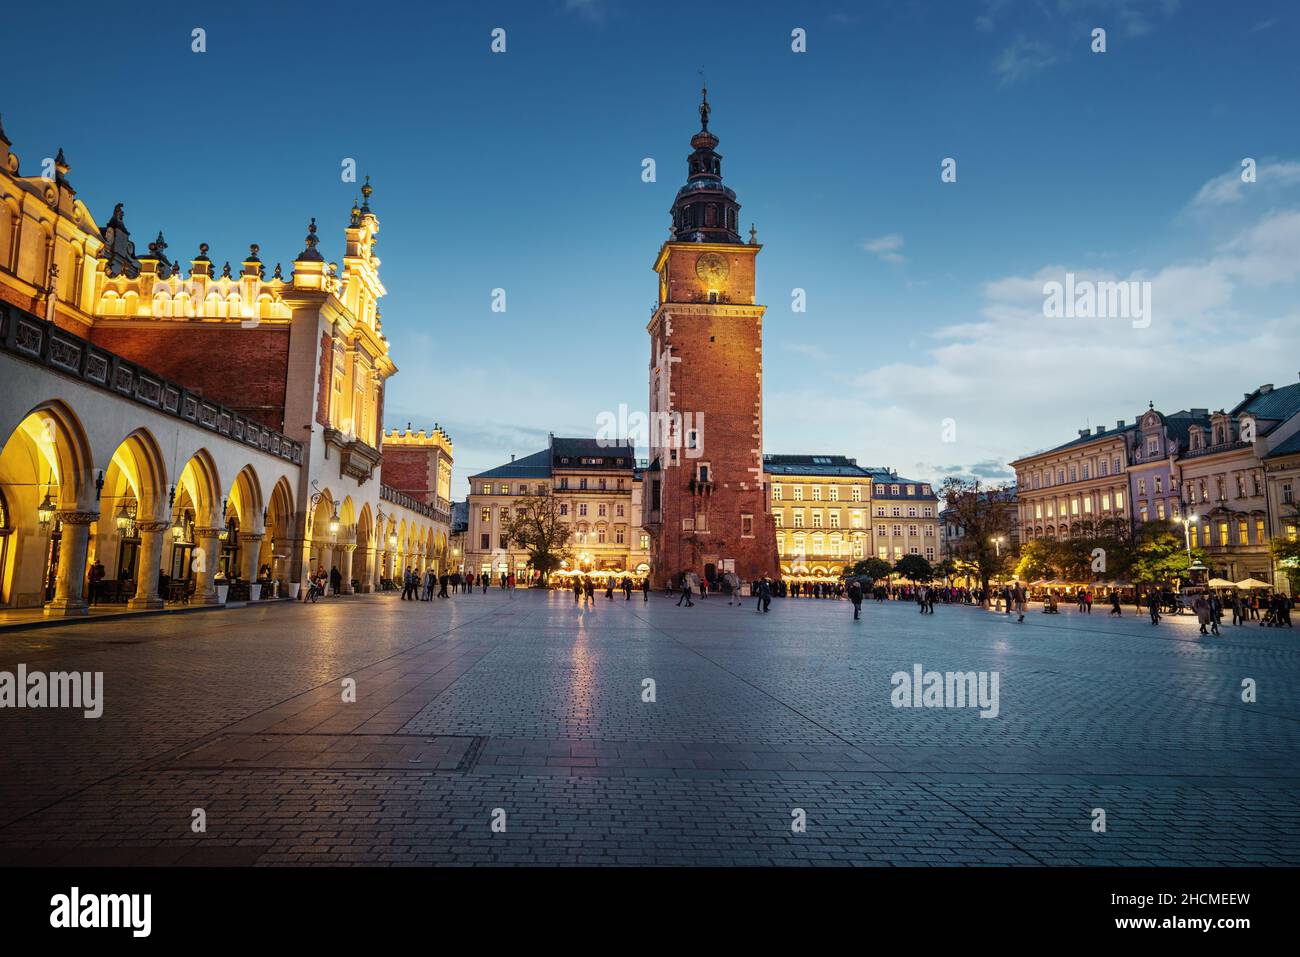 Town Hall Tower and Cloth Hall at Main Market Square at night - Krakow, Poland Stock Photo